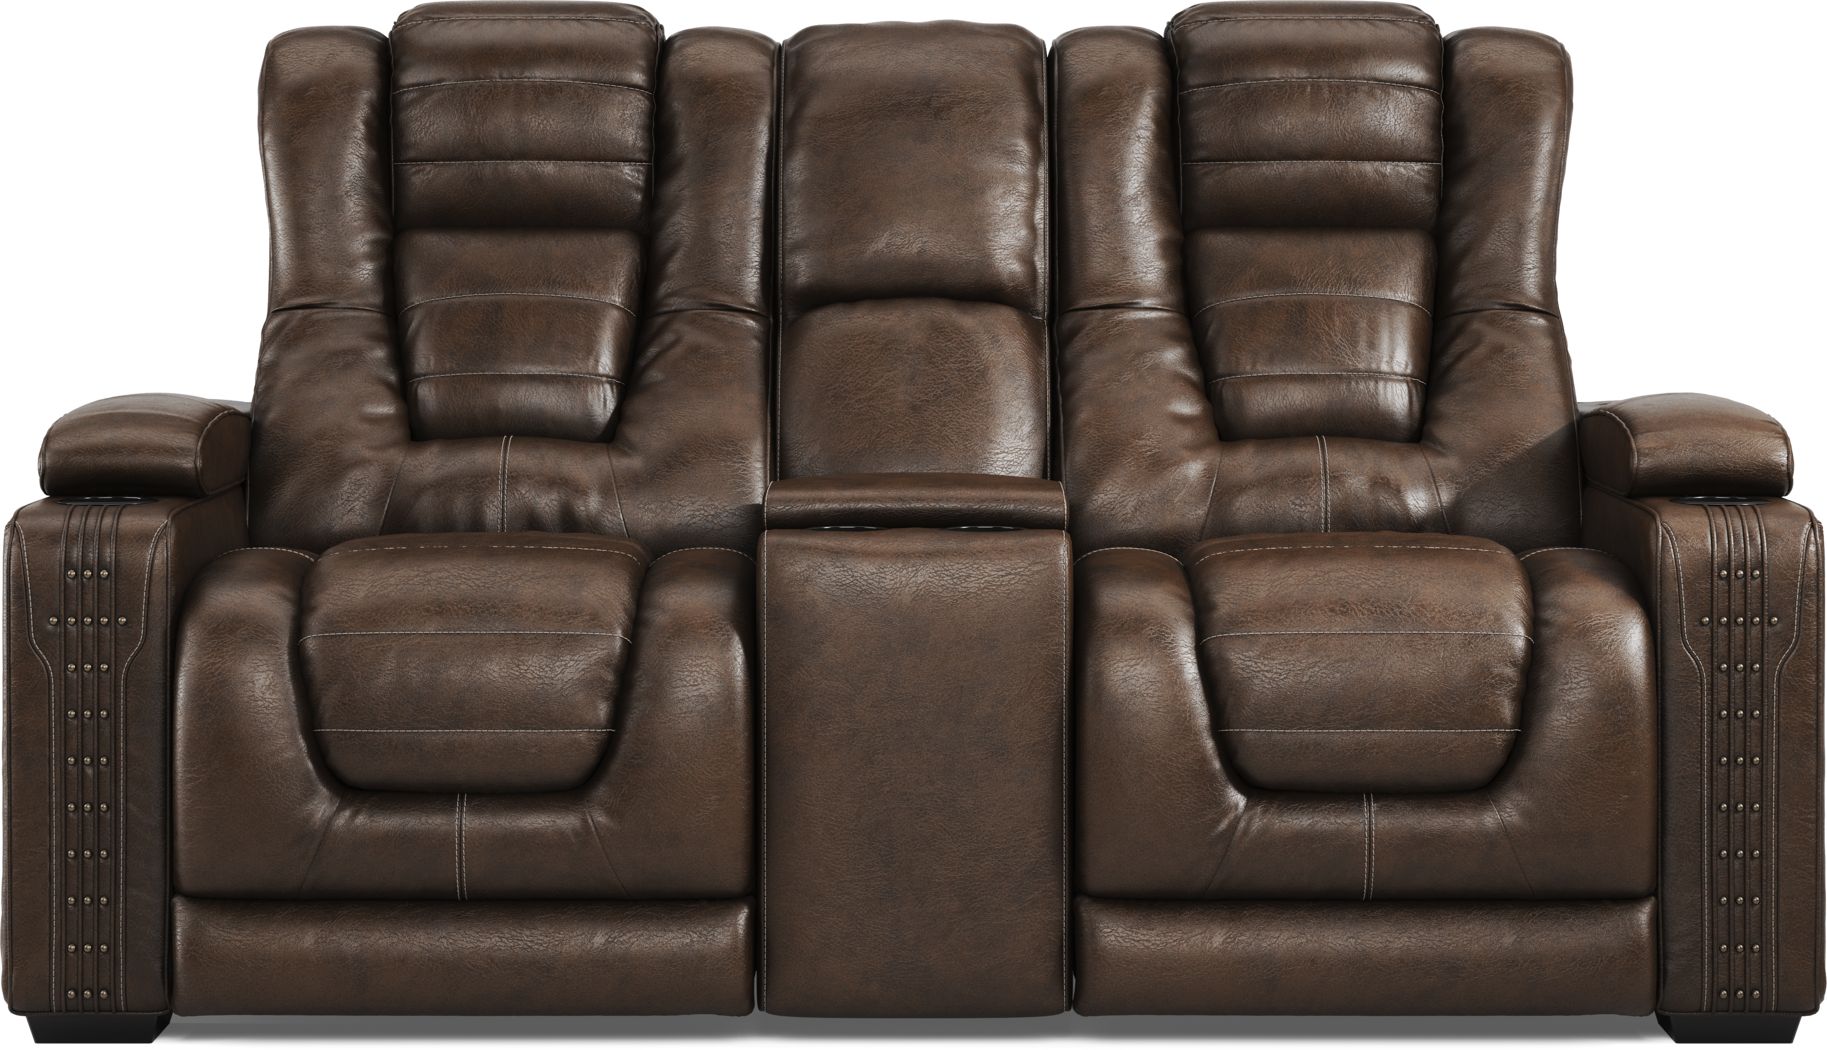 Brown Leather Loveseats, Light Brown Leather Loveseat Recliner